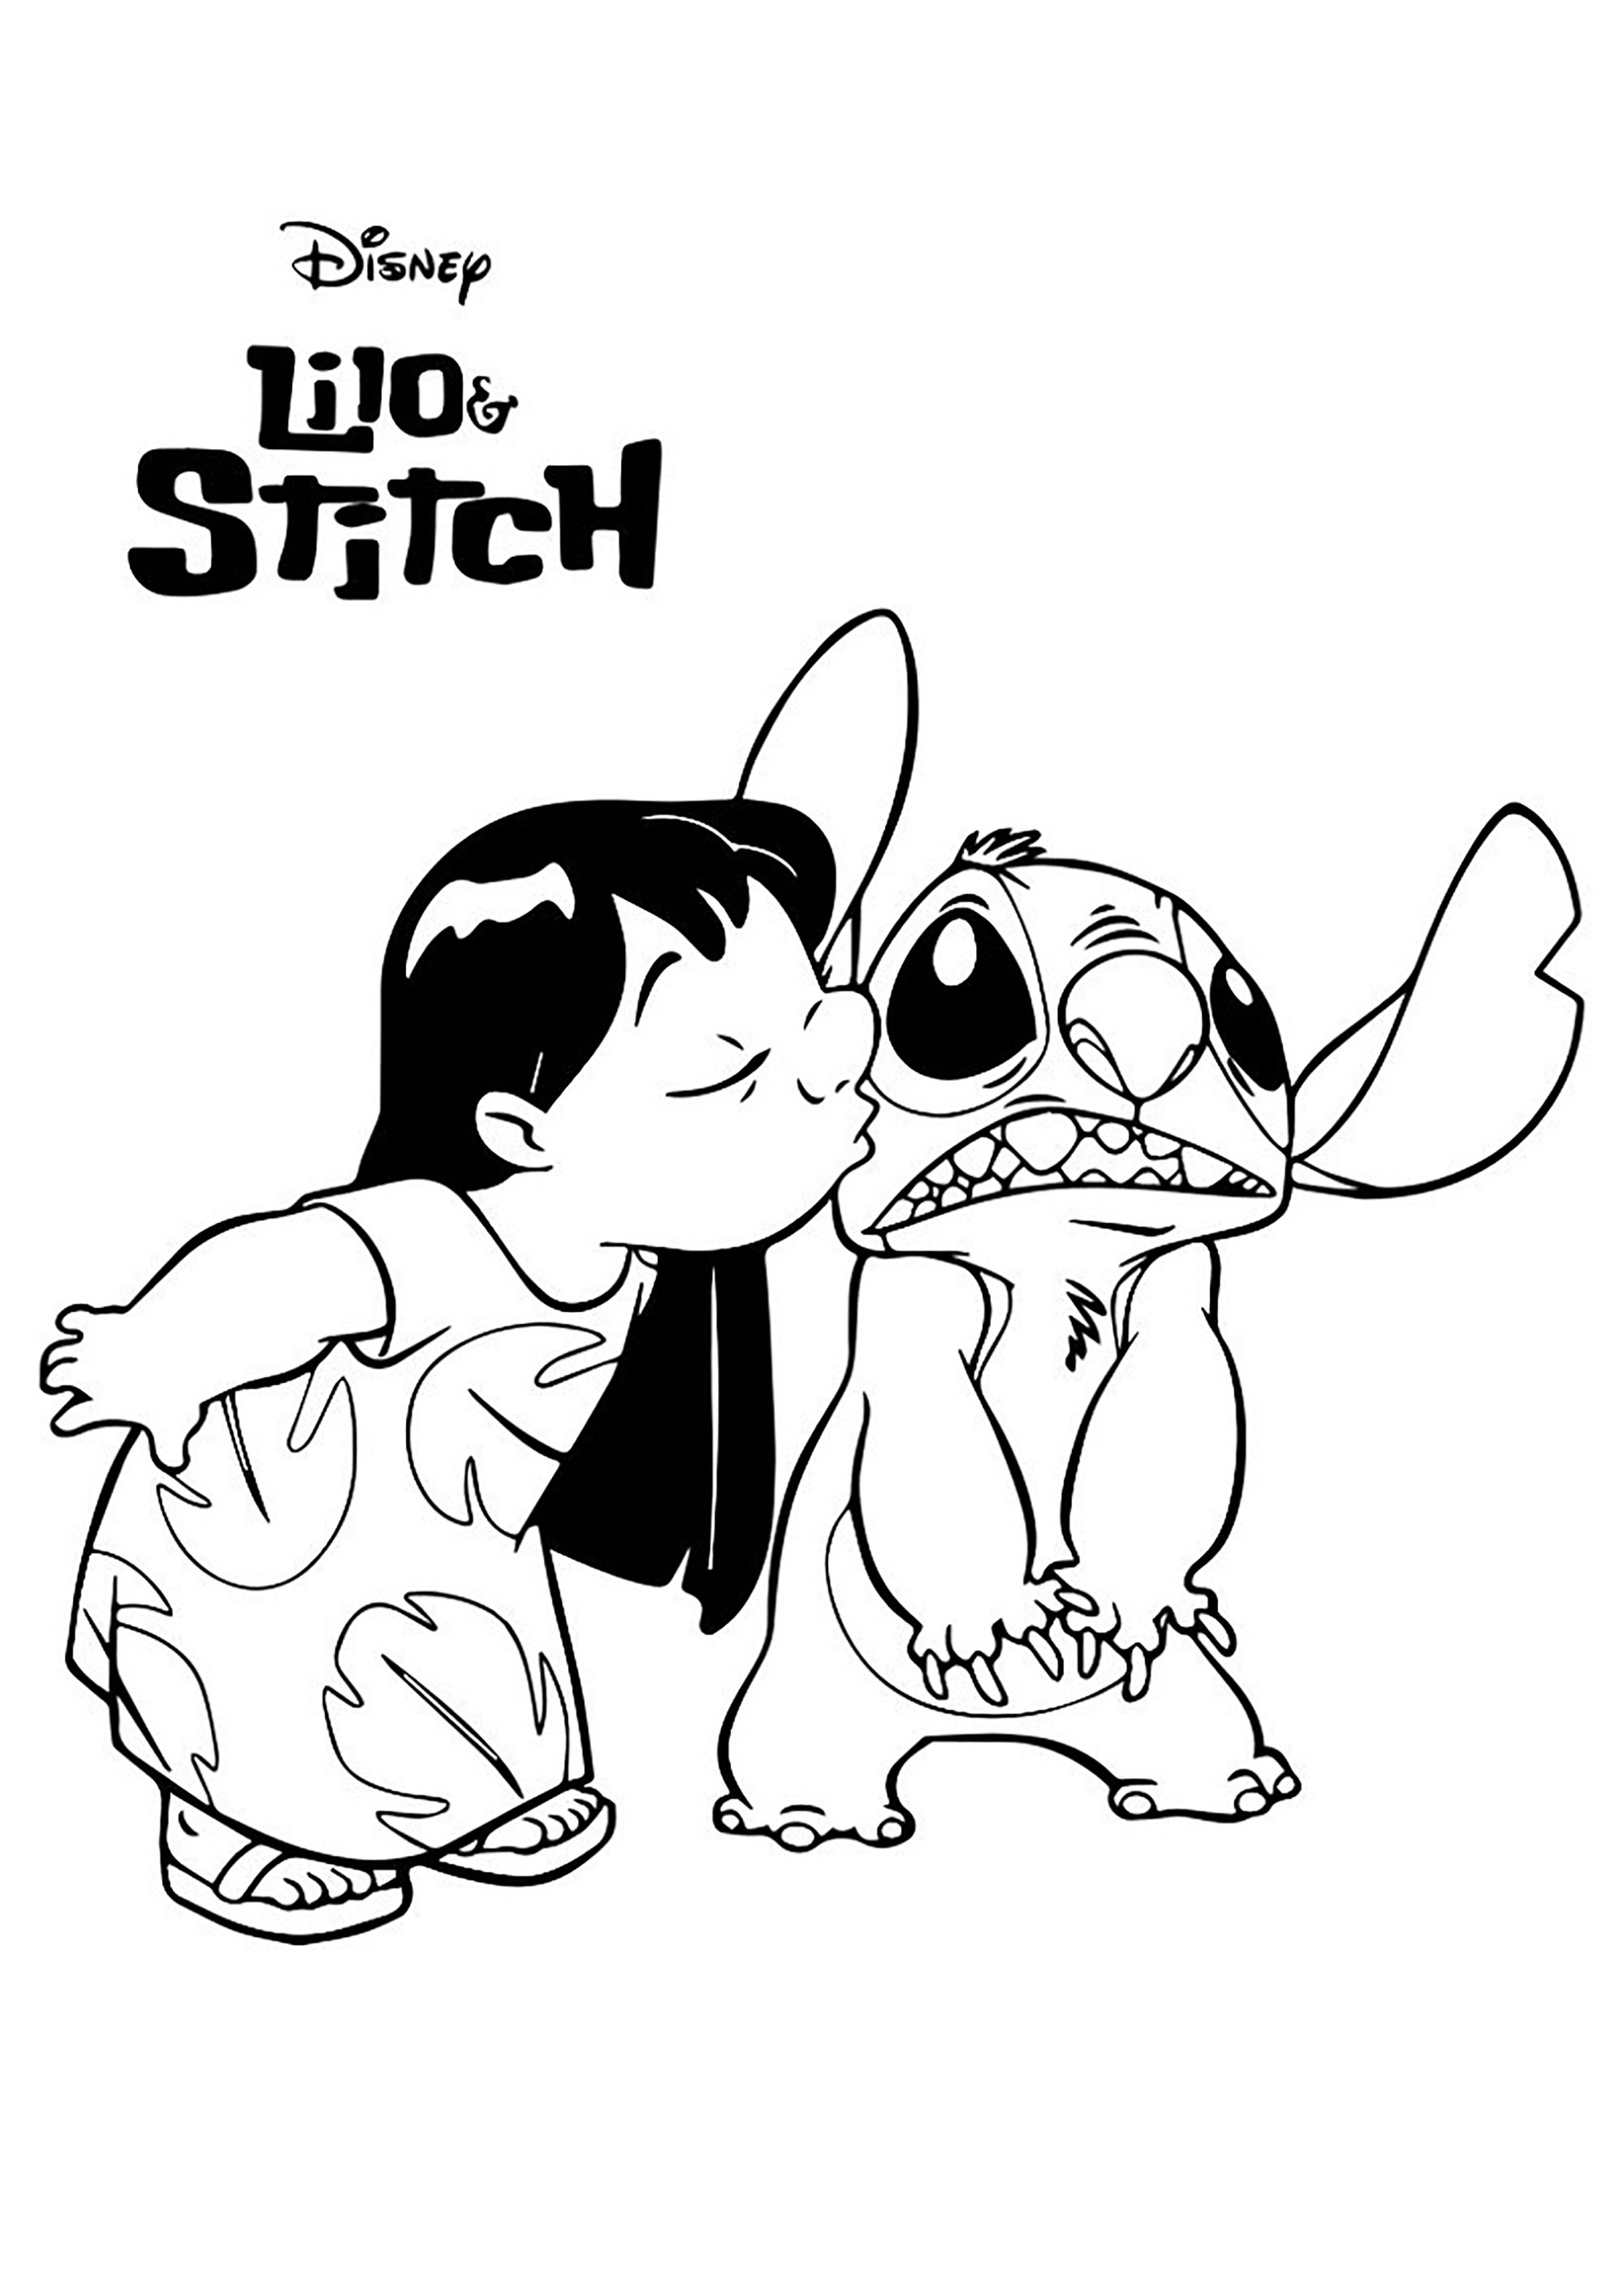 Lilo and stich to color for kids   Lilo And Stich Kids Coloring Pages